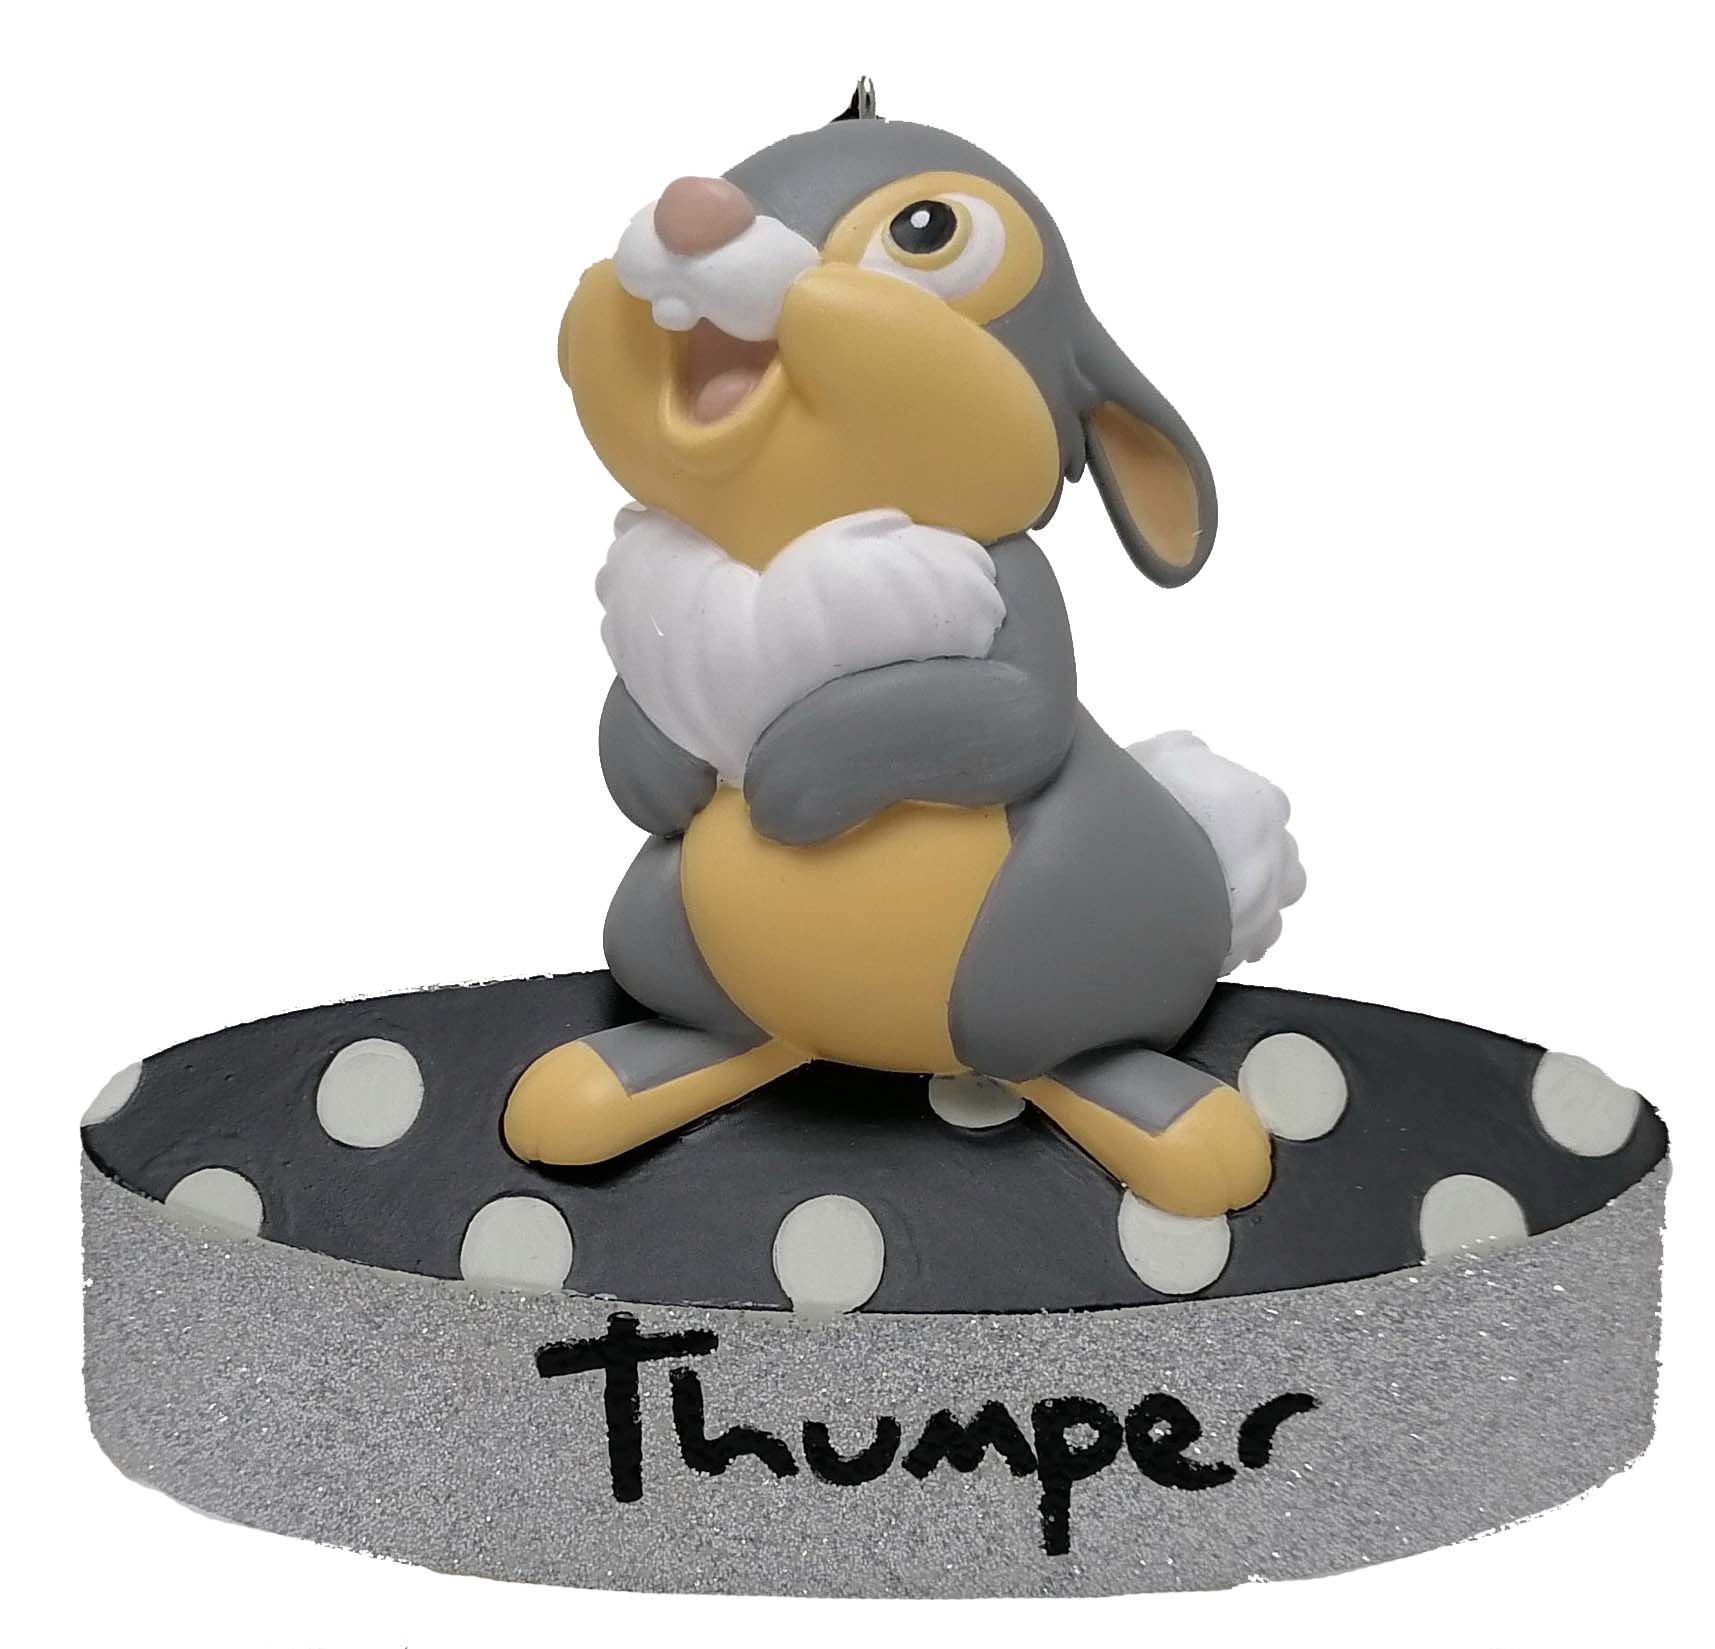 Thumper on round ornament